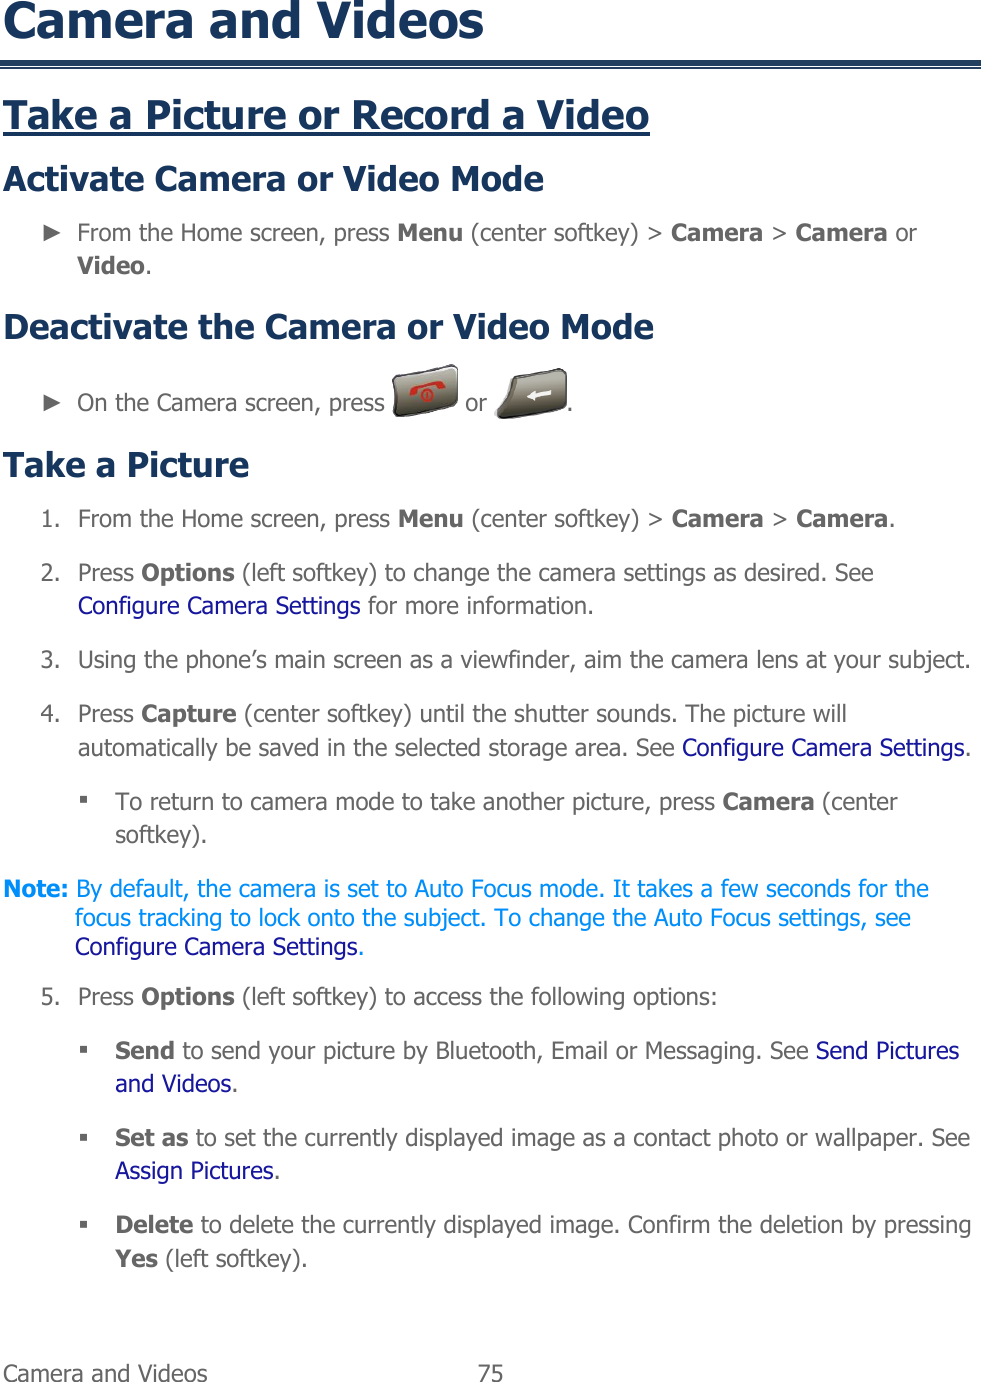  Camera and Videos   75   Camera and Videos Take a Picture or Record a Video  Activate Camera or Video Mode ► From the Home screen, press Menu (center softkey) &gt; Camera &gt; Camera or Video. Deactivate the Camera or Video Mode ► On the Camera screen, press   or  . Take a Picture 1. From the Home screen, press Menu (center softkey) &gt; Camera &gt; Camera. 2. Press Options (left softkey) to change the camera settings as desired. See Configure Camera Settings for more information. 3. Using the phone’s main screen as a viewfinder, aim the camera lens at your subject. 4. Press Capture (center softkey) until the shutter sounds. The picture will automatically be saved in the selected storage area. See Configure Camera Settings.  To return to camera mode to take another picture, press Camera (center softkey). Note: By default, the camera is set to Auto Focus mode. It takes a few seconds for the focus tracking to lock onto the subject. To change the Auto Focus settings, see Configure Camera Settings. 5. Press Options (left softkey) to access the following options:  Send to send your picture by Bluetooth, Email or Messaging. See Send Pictures and Videos.  Set as to set the currently displayed image as a contact photo or wallpaper. See Assign Pictures.  Delete to delete the currently displayed image. Confirm the deletion by pressing Yes (left softkey). 